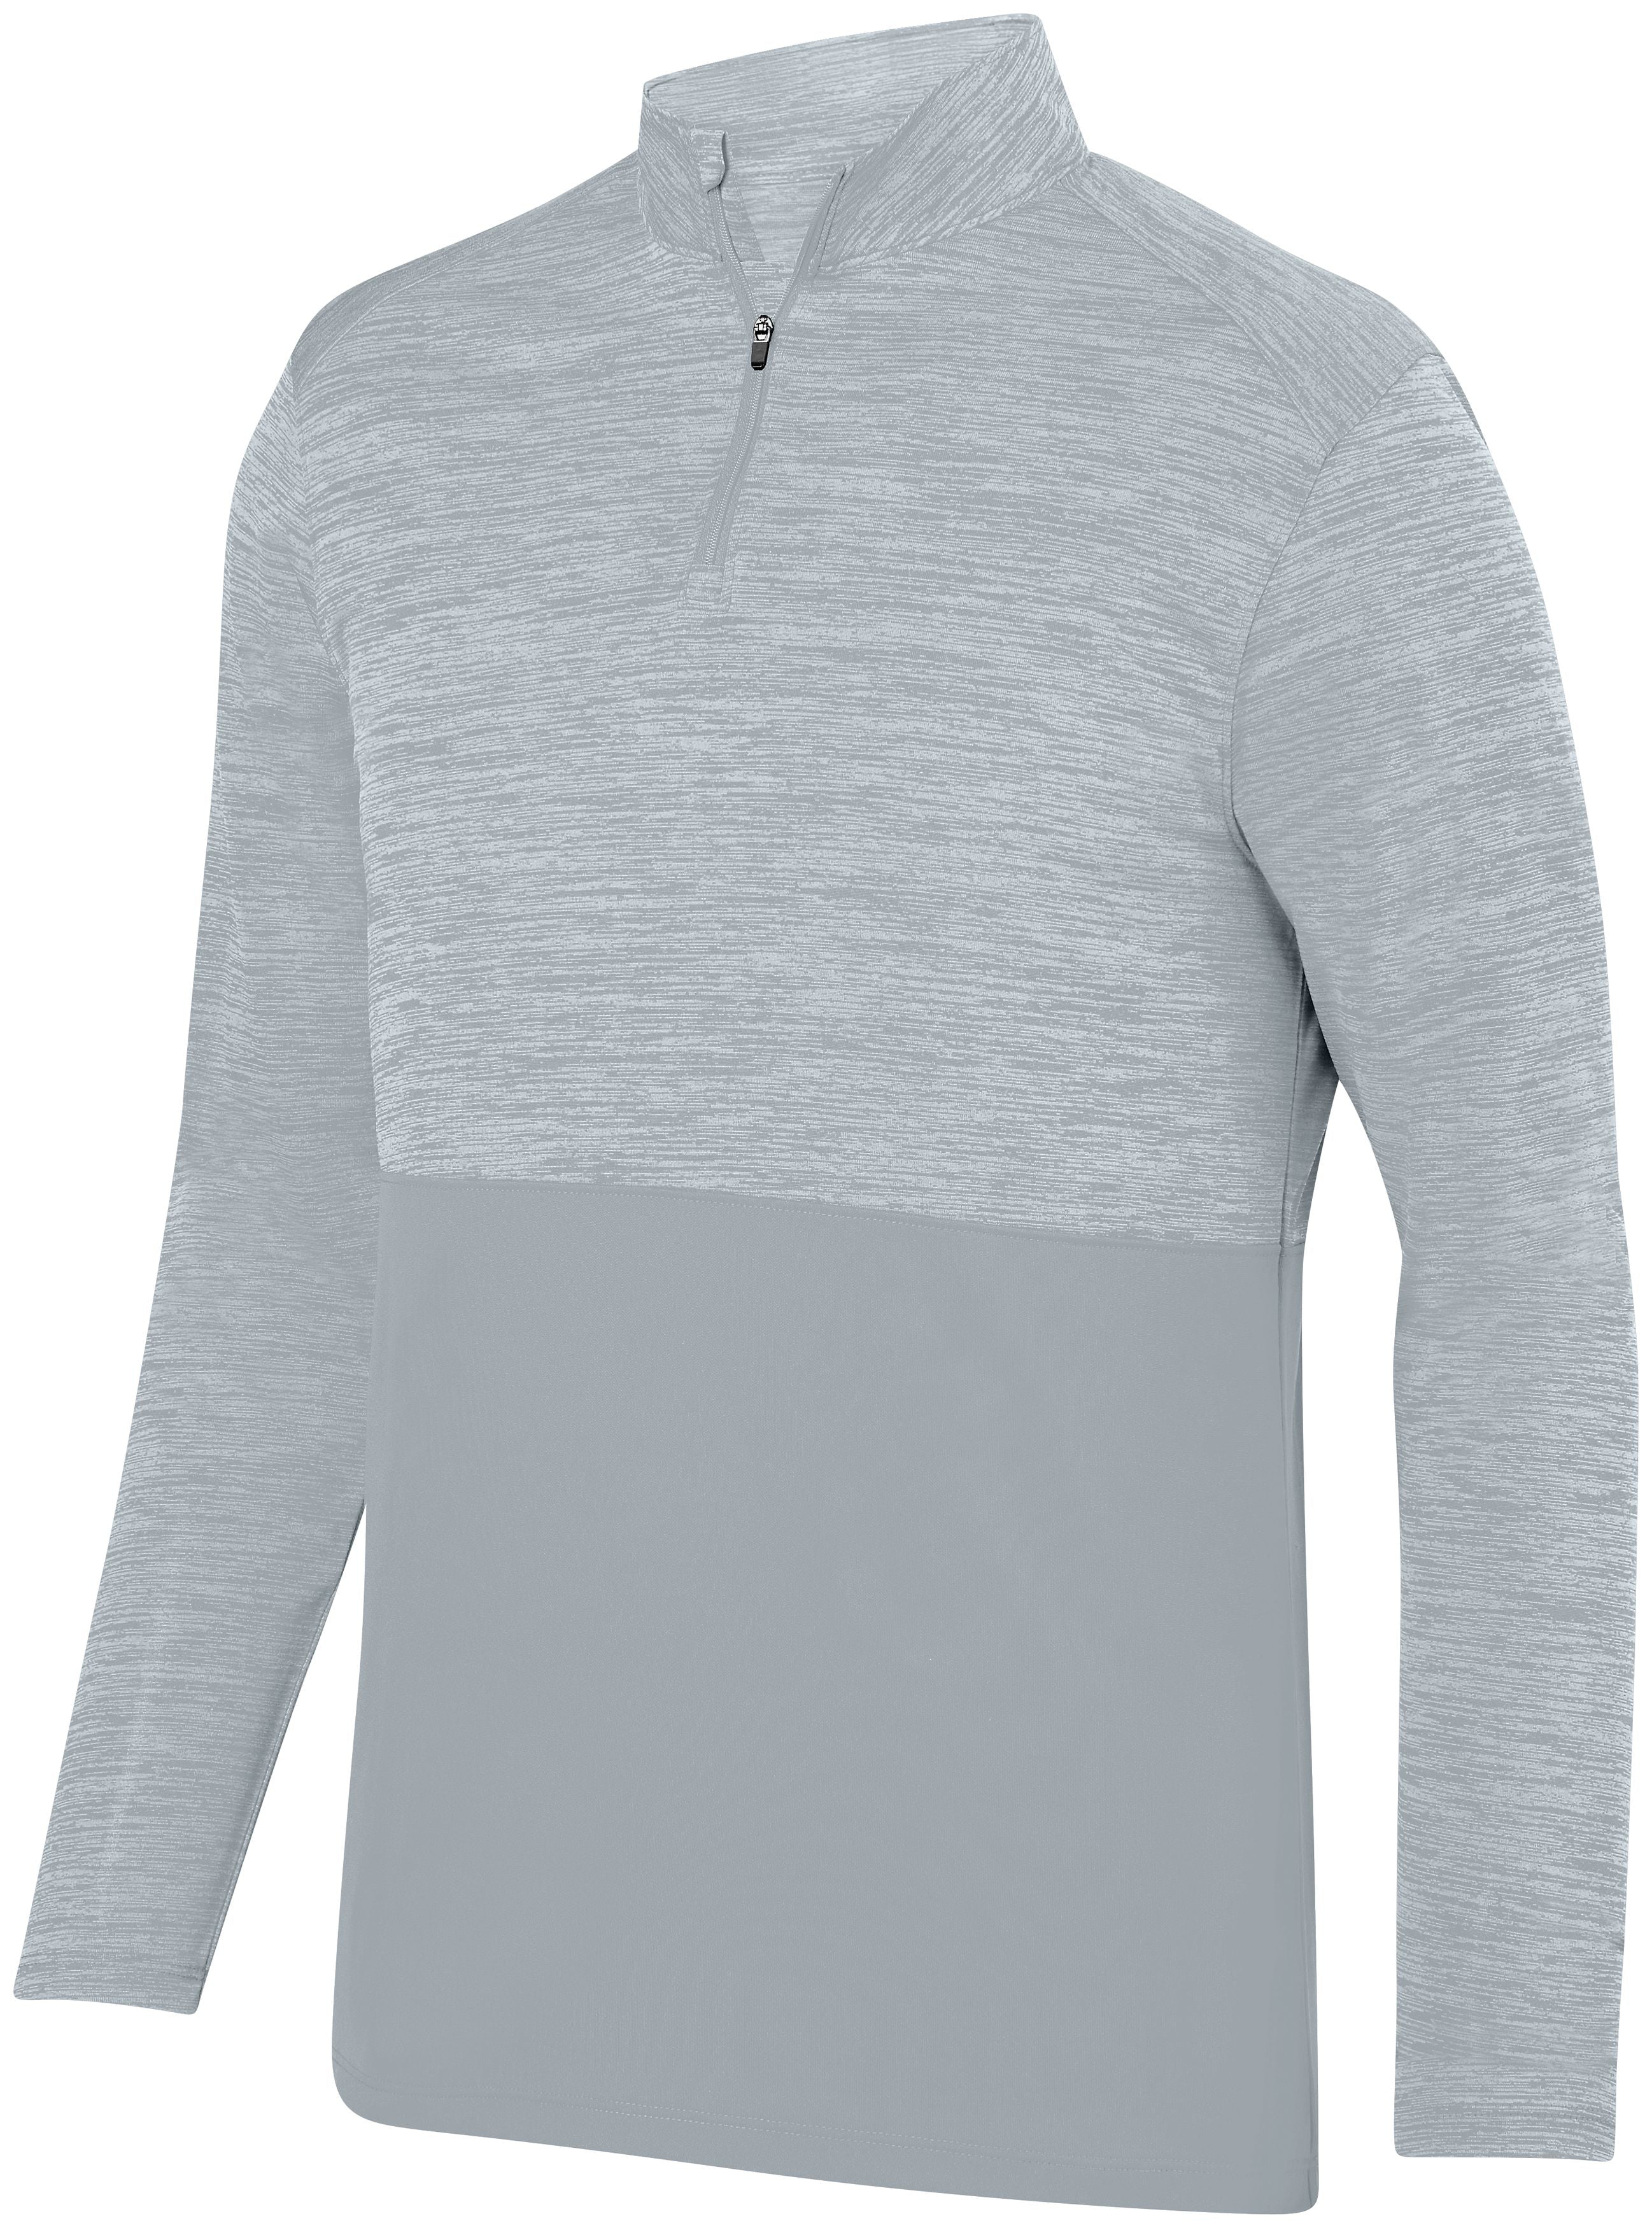 Augusta Sportswear Shadow Tonal Heather 1/4 Zip Pullover in Silver  -Part of the Adult, Adult-Pullover, Augusta-Products, Outerwear, Tonal-Fleece-Collection product lines at KanaleyCreations.com